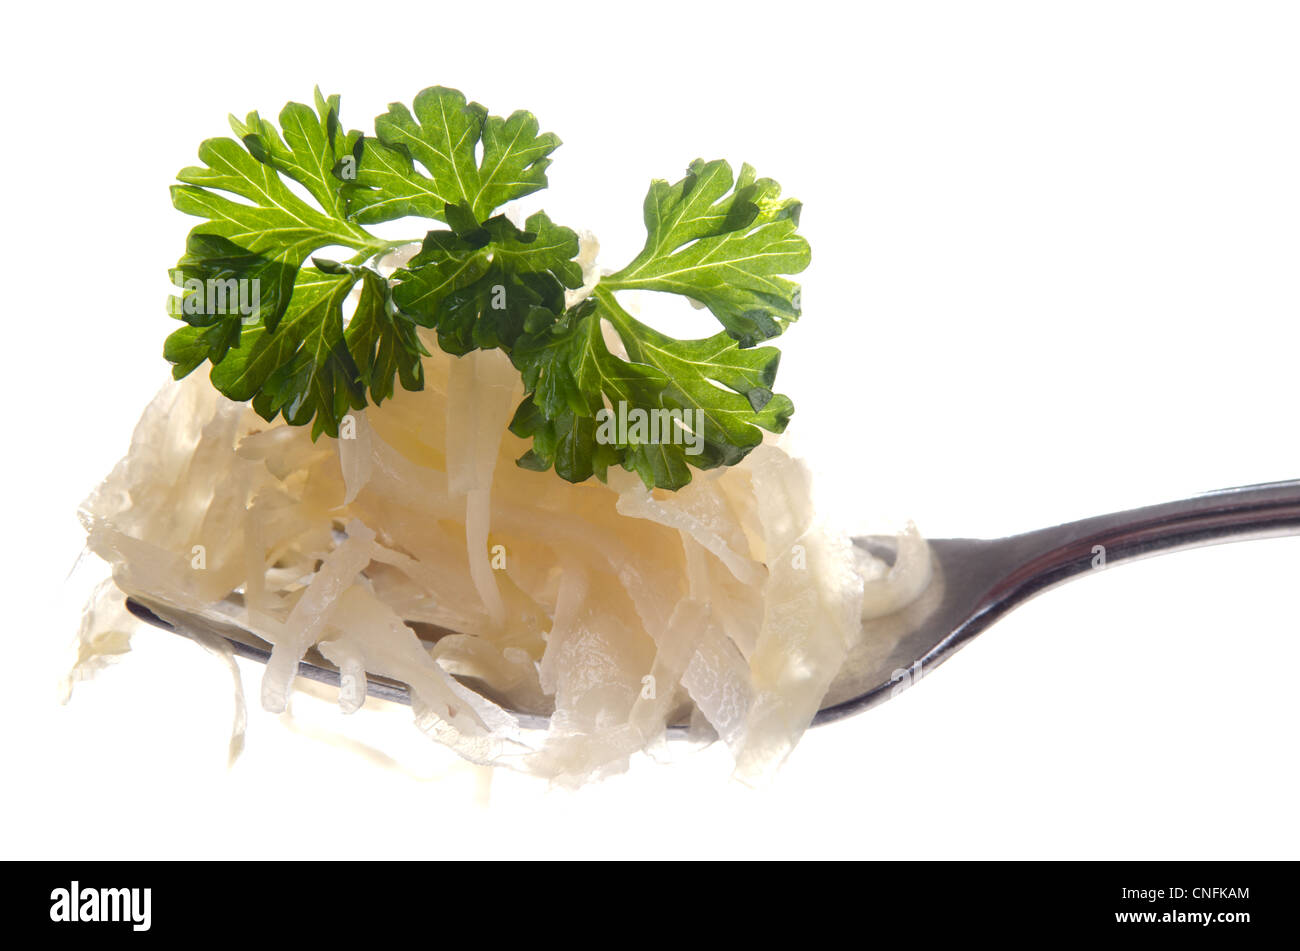 Sauerkraut and parsley on a fork Stock Photo